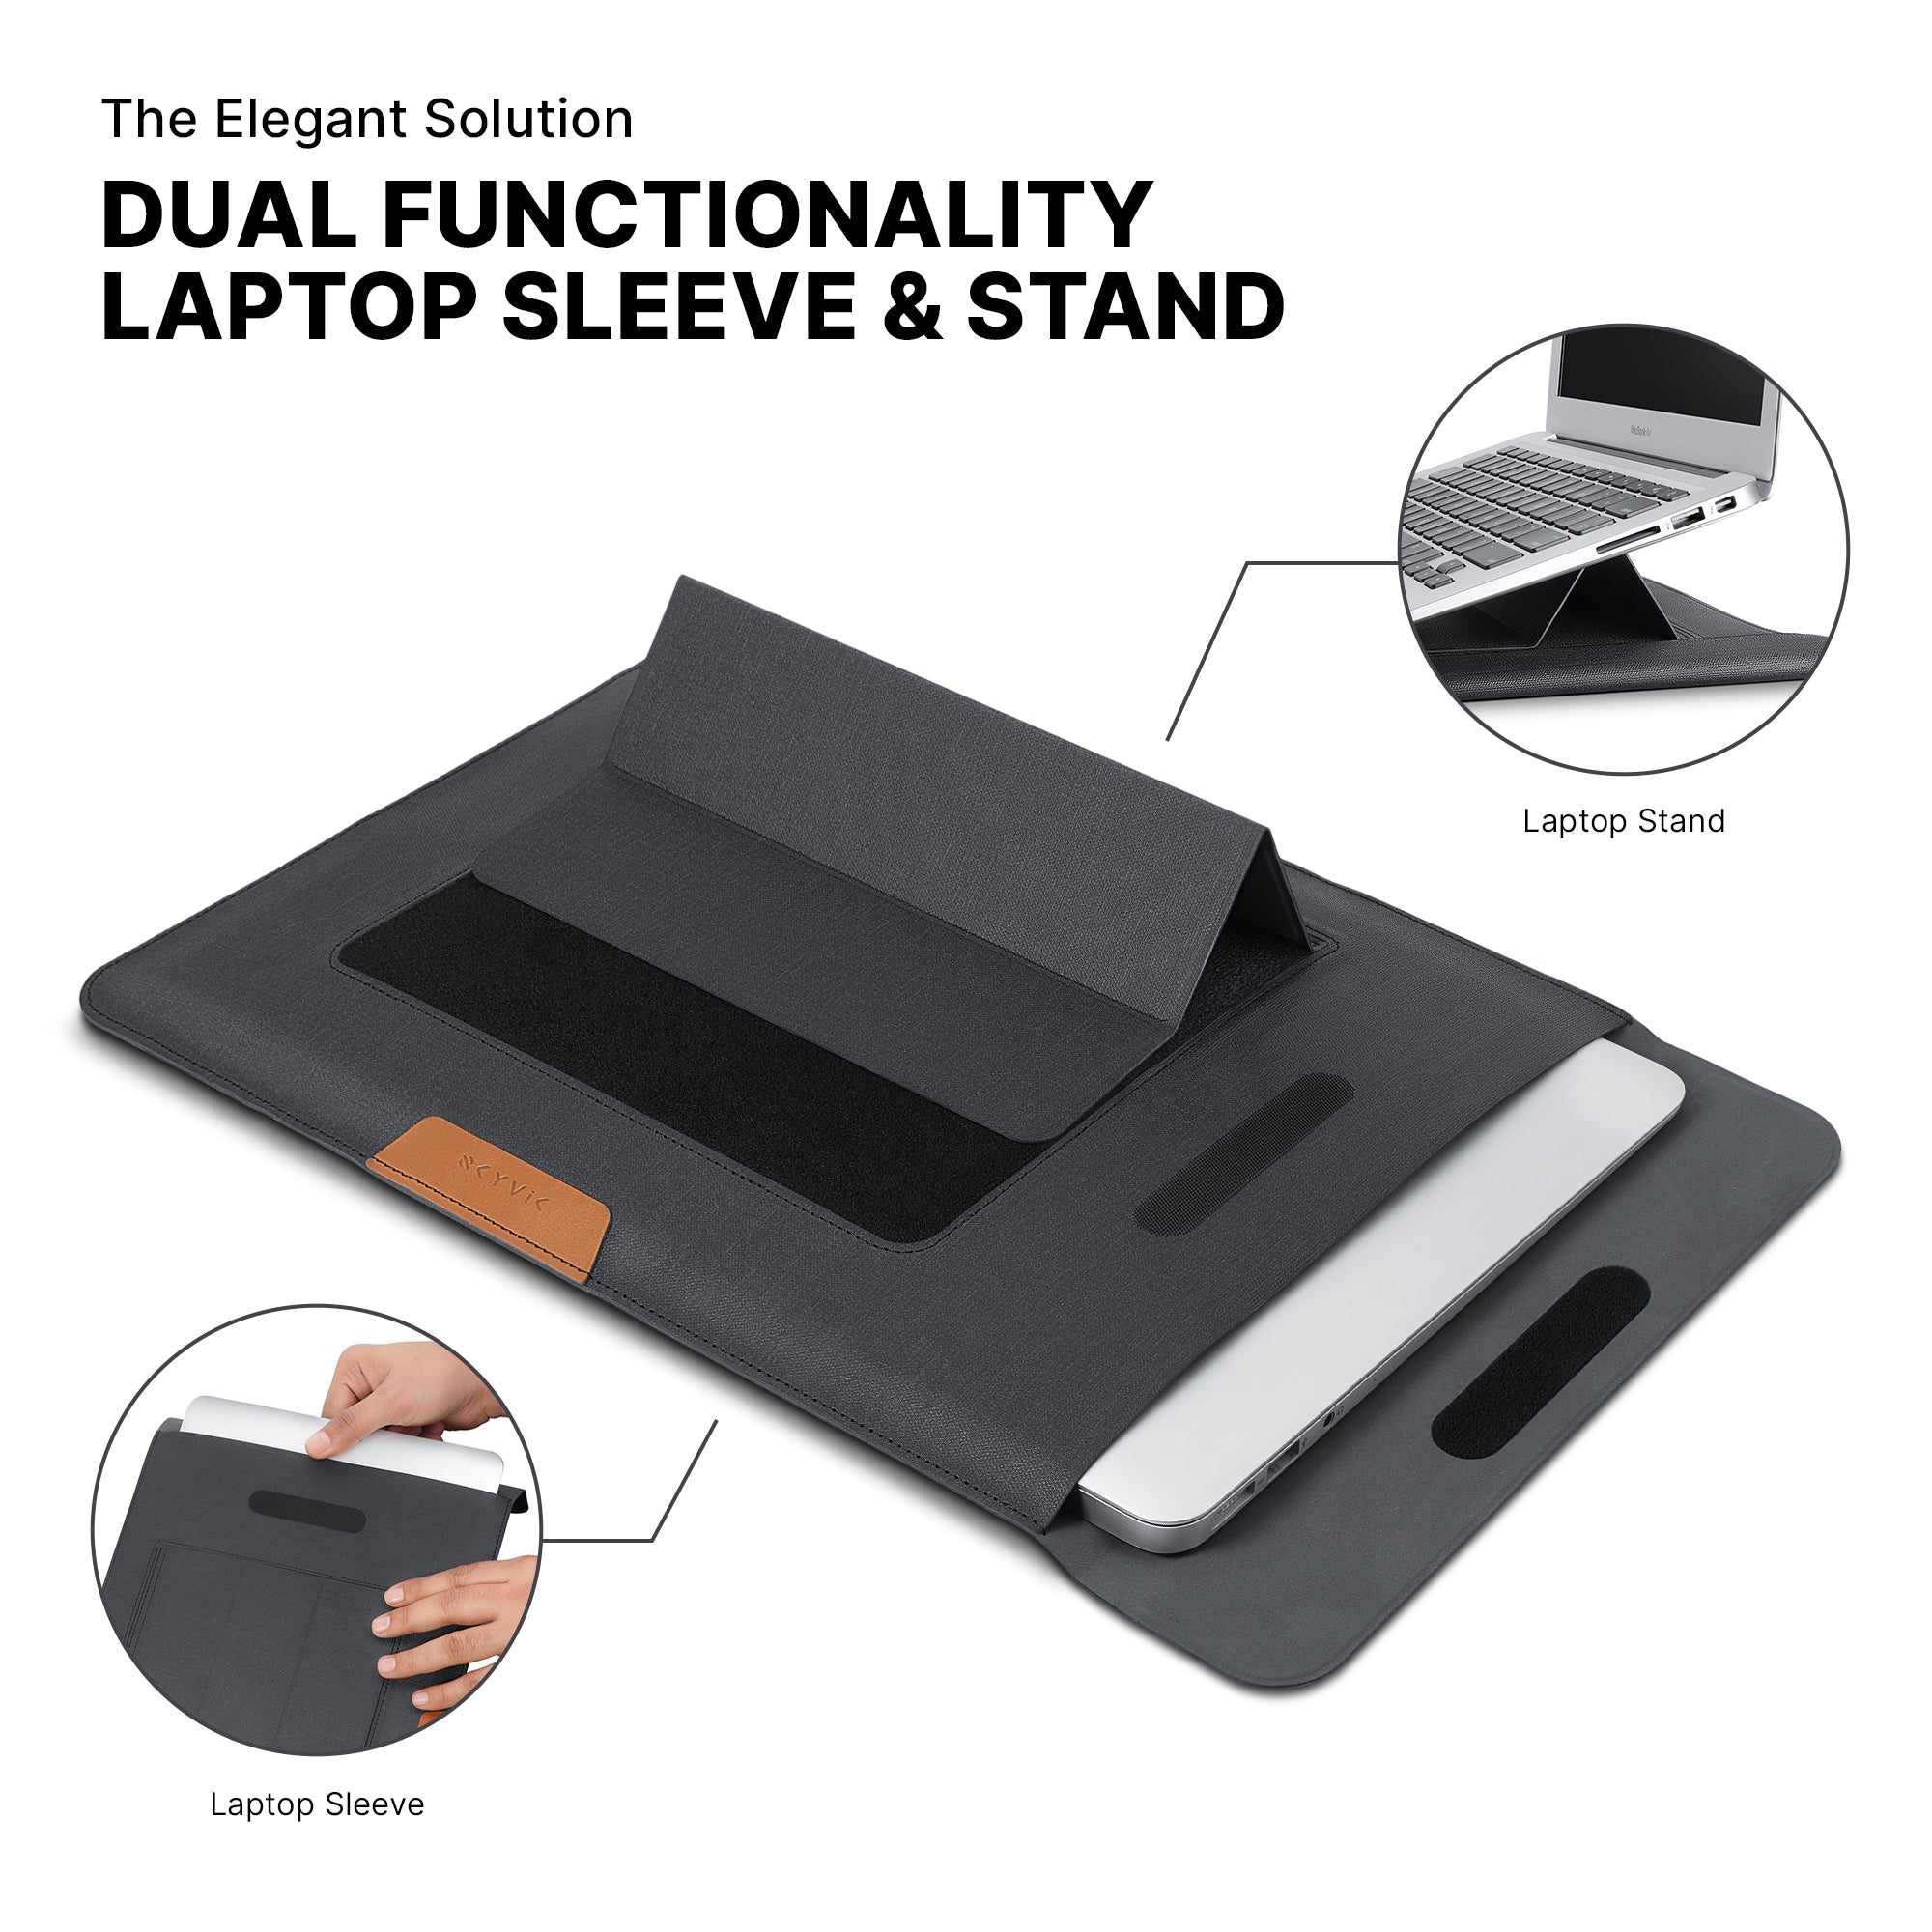 Skyvik Elev8 2 in 1 Laptop Carry Sleeve & Stand for Office and Travel